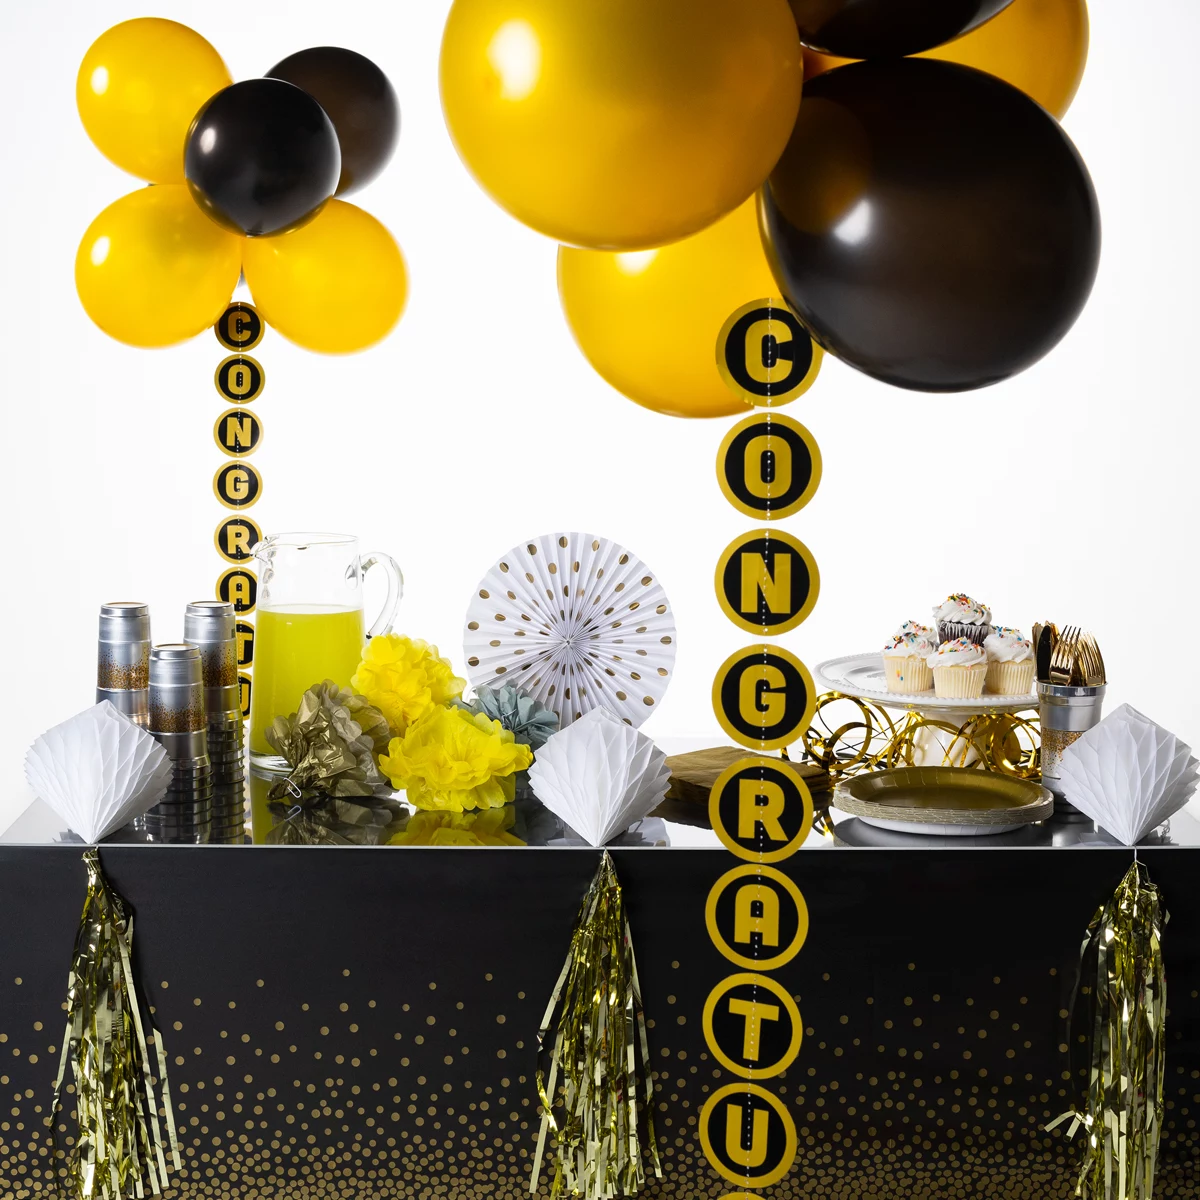 Black and gold party table with Congratulations balloon tail display